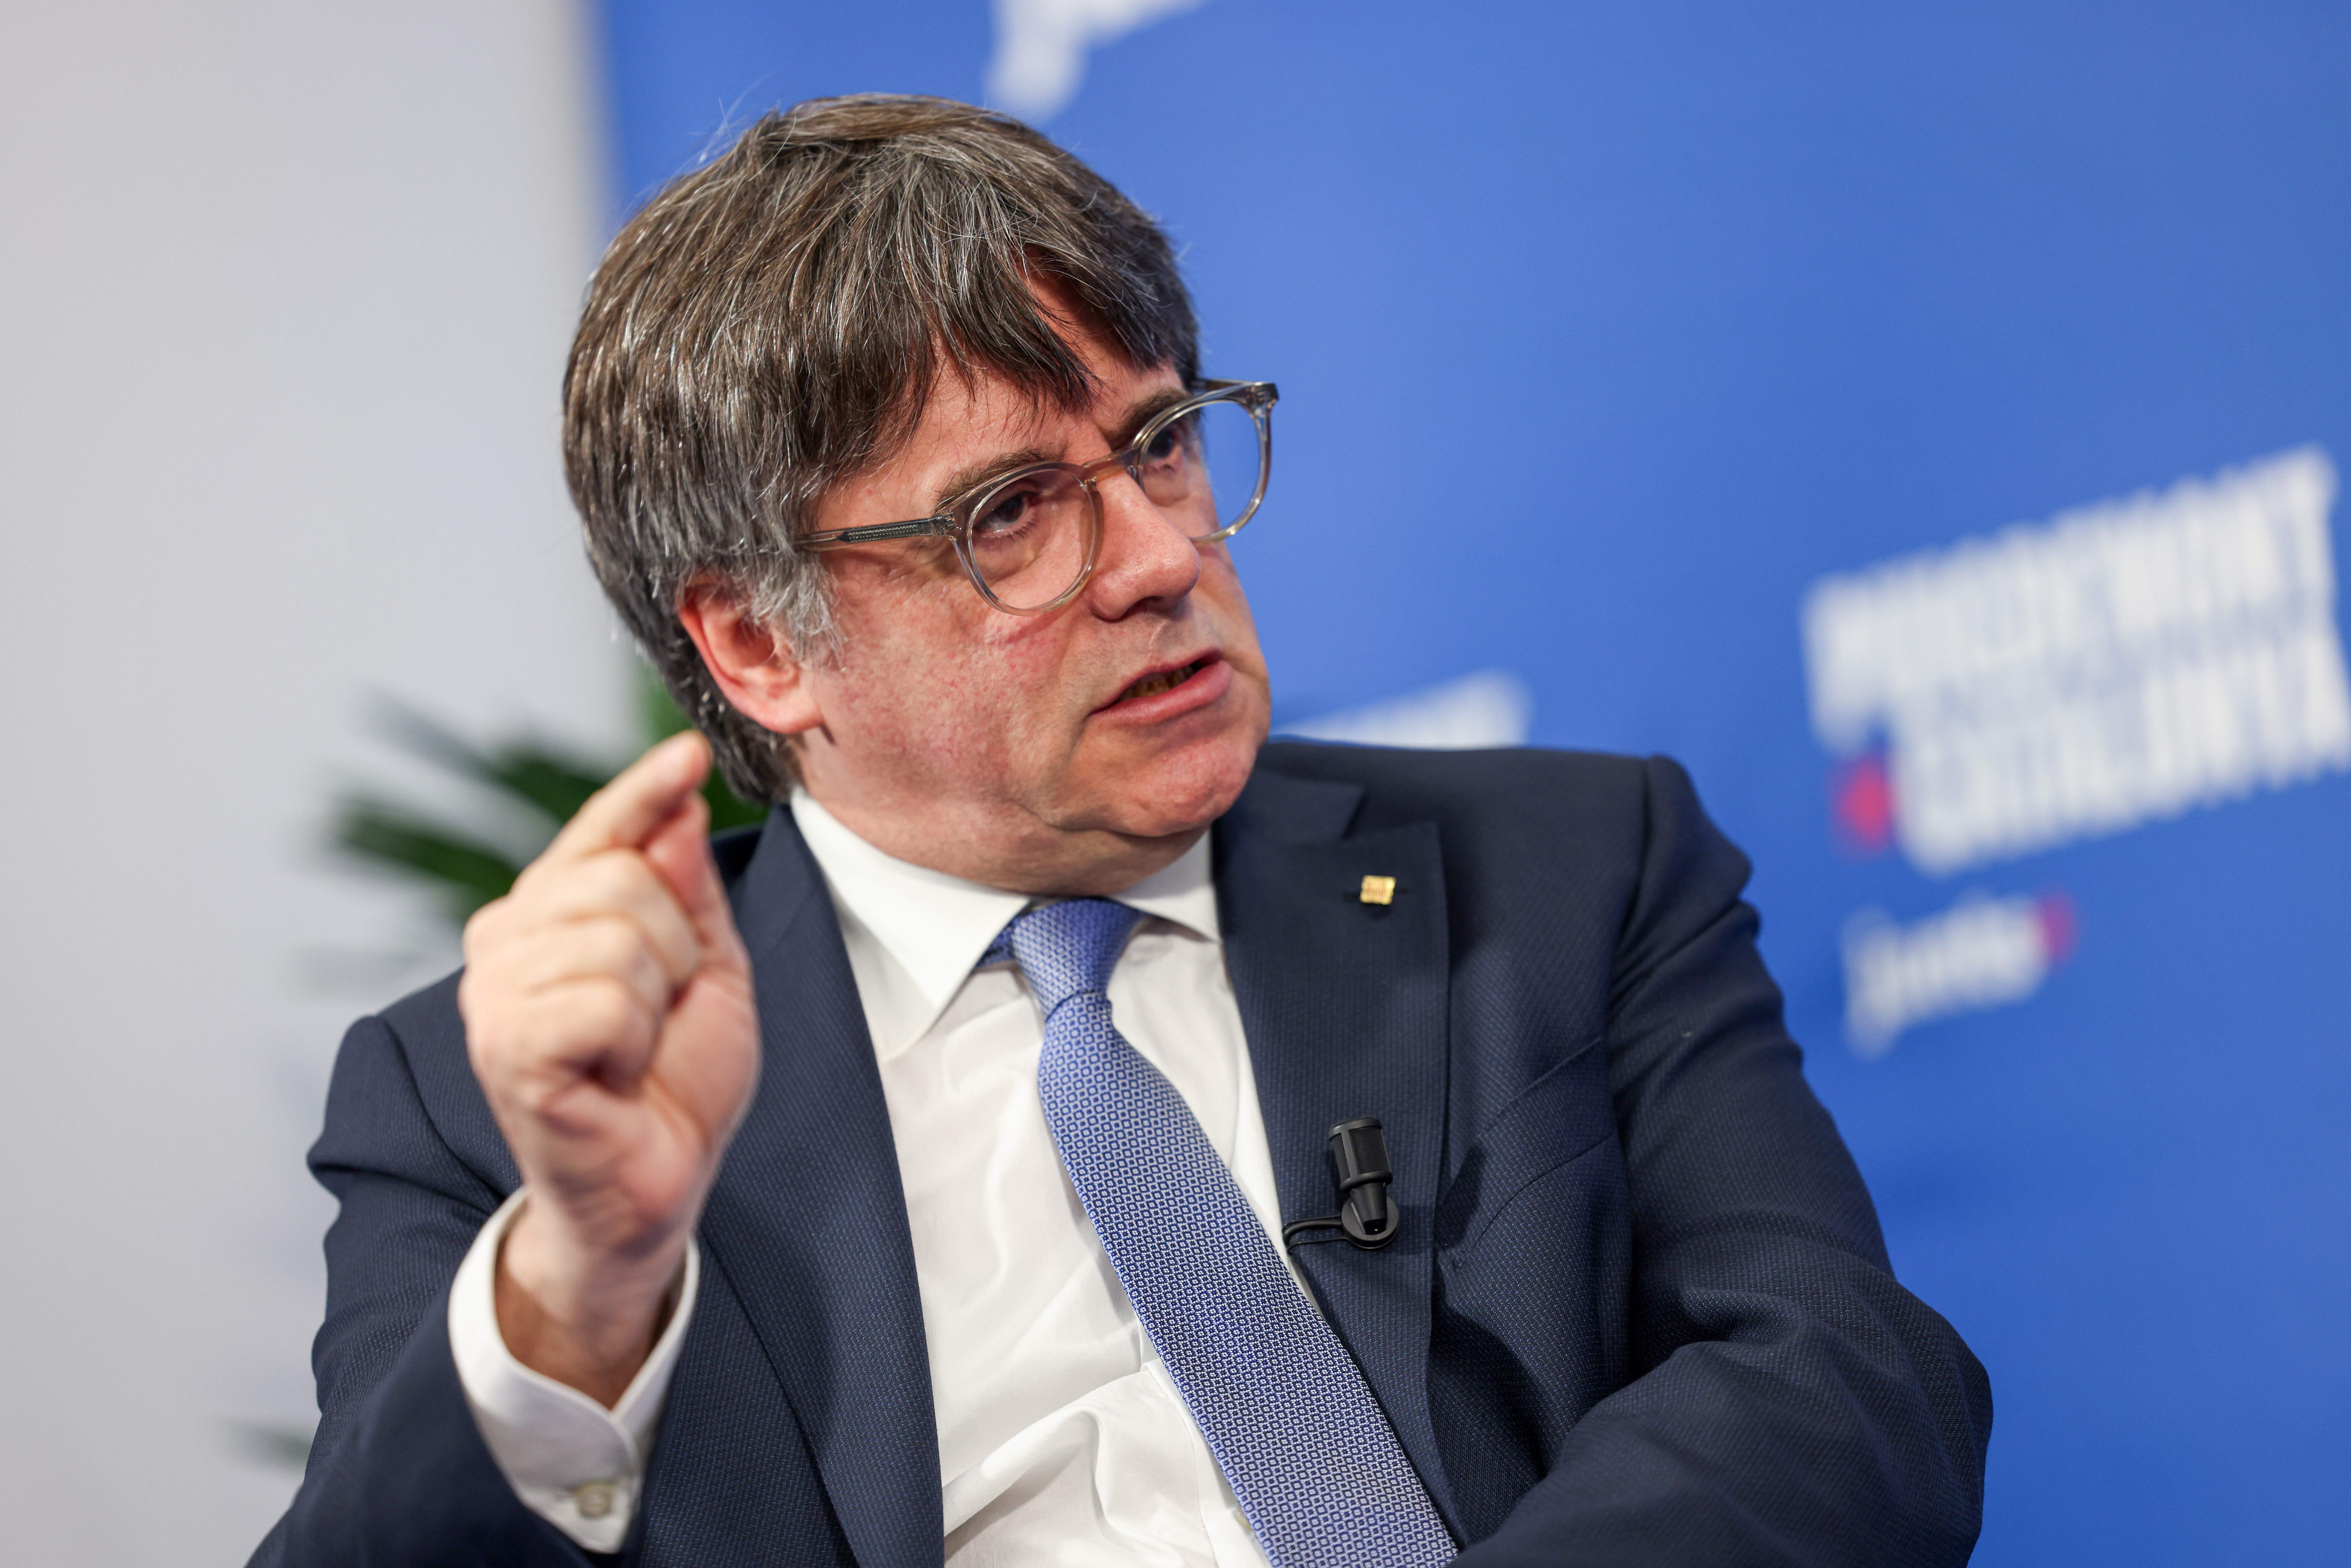 Puigdemont rejects Sabadell takeover bid: "A strong response is needed, with law and justice"